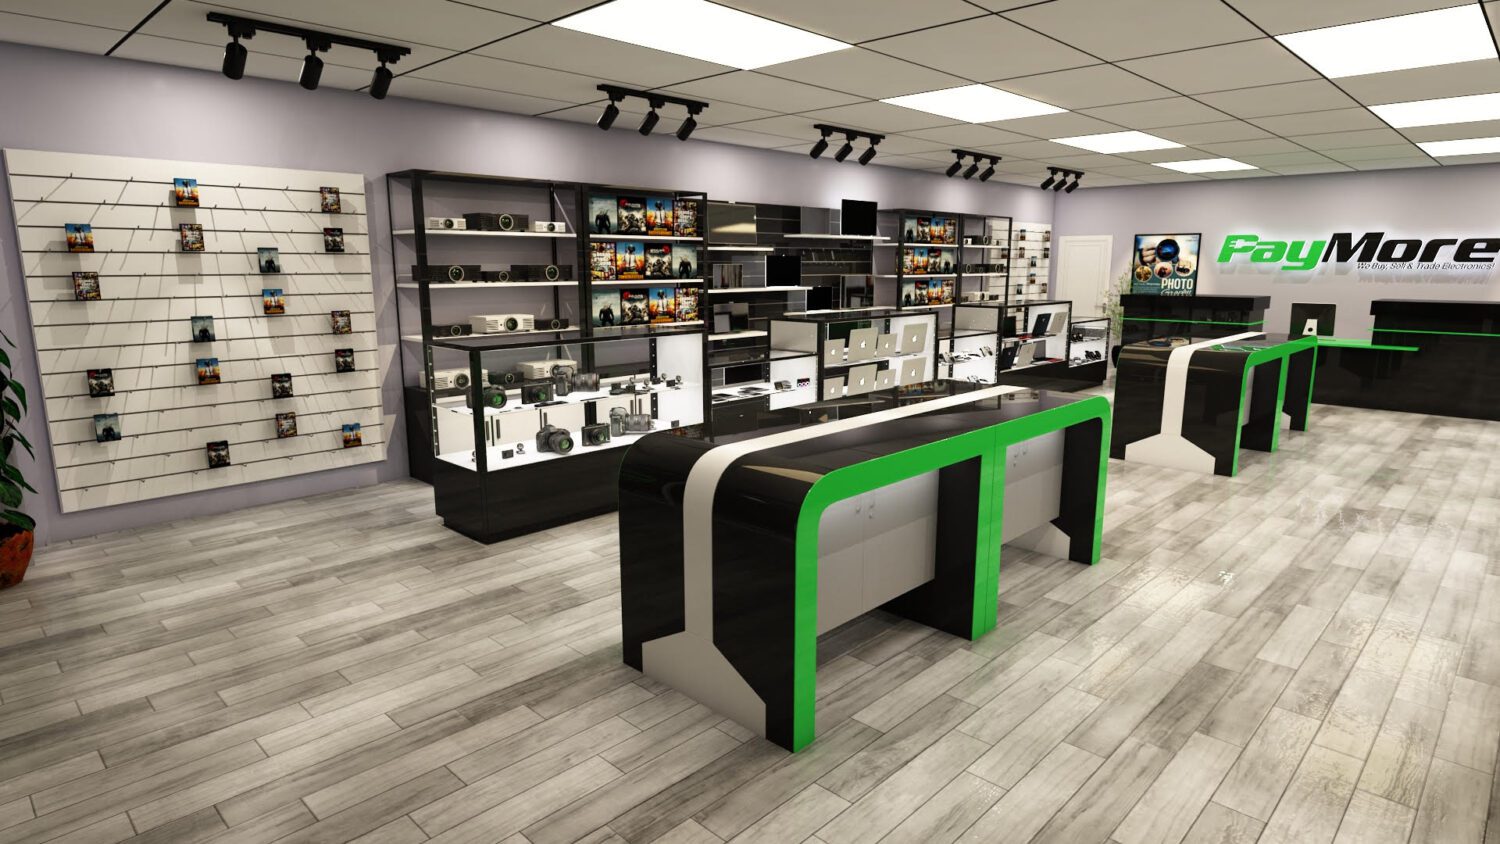 Interior image of a PayMore store, green and black counter, glass shelves along wall